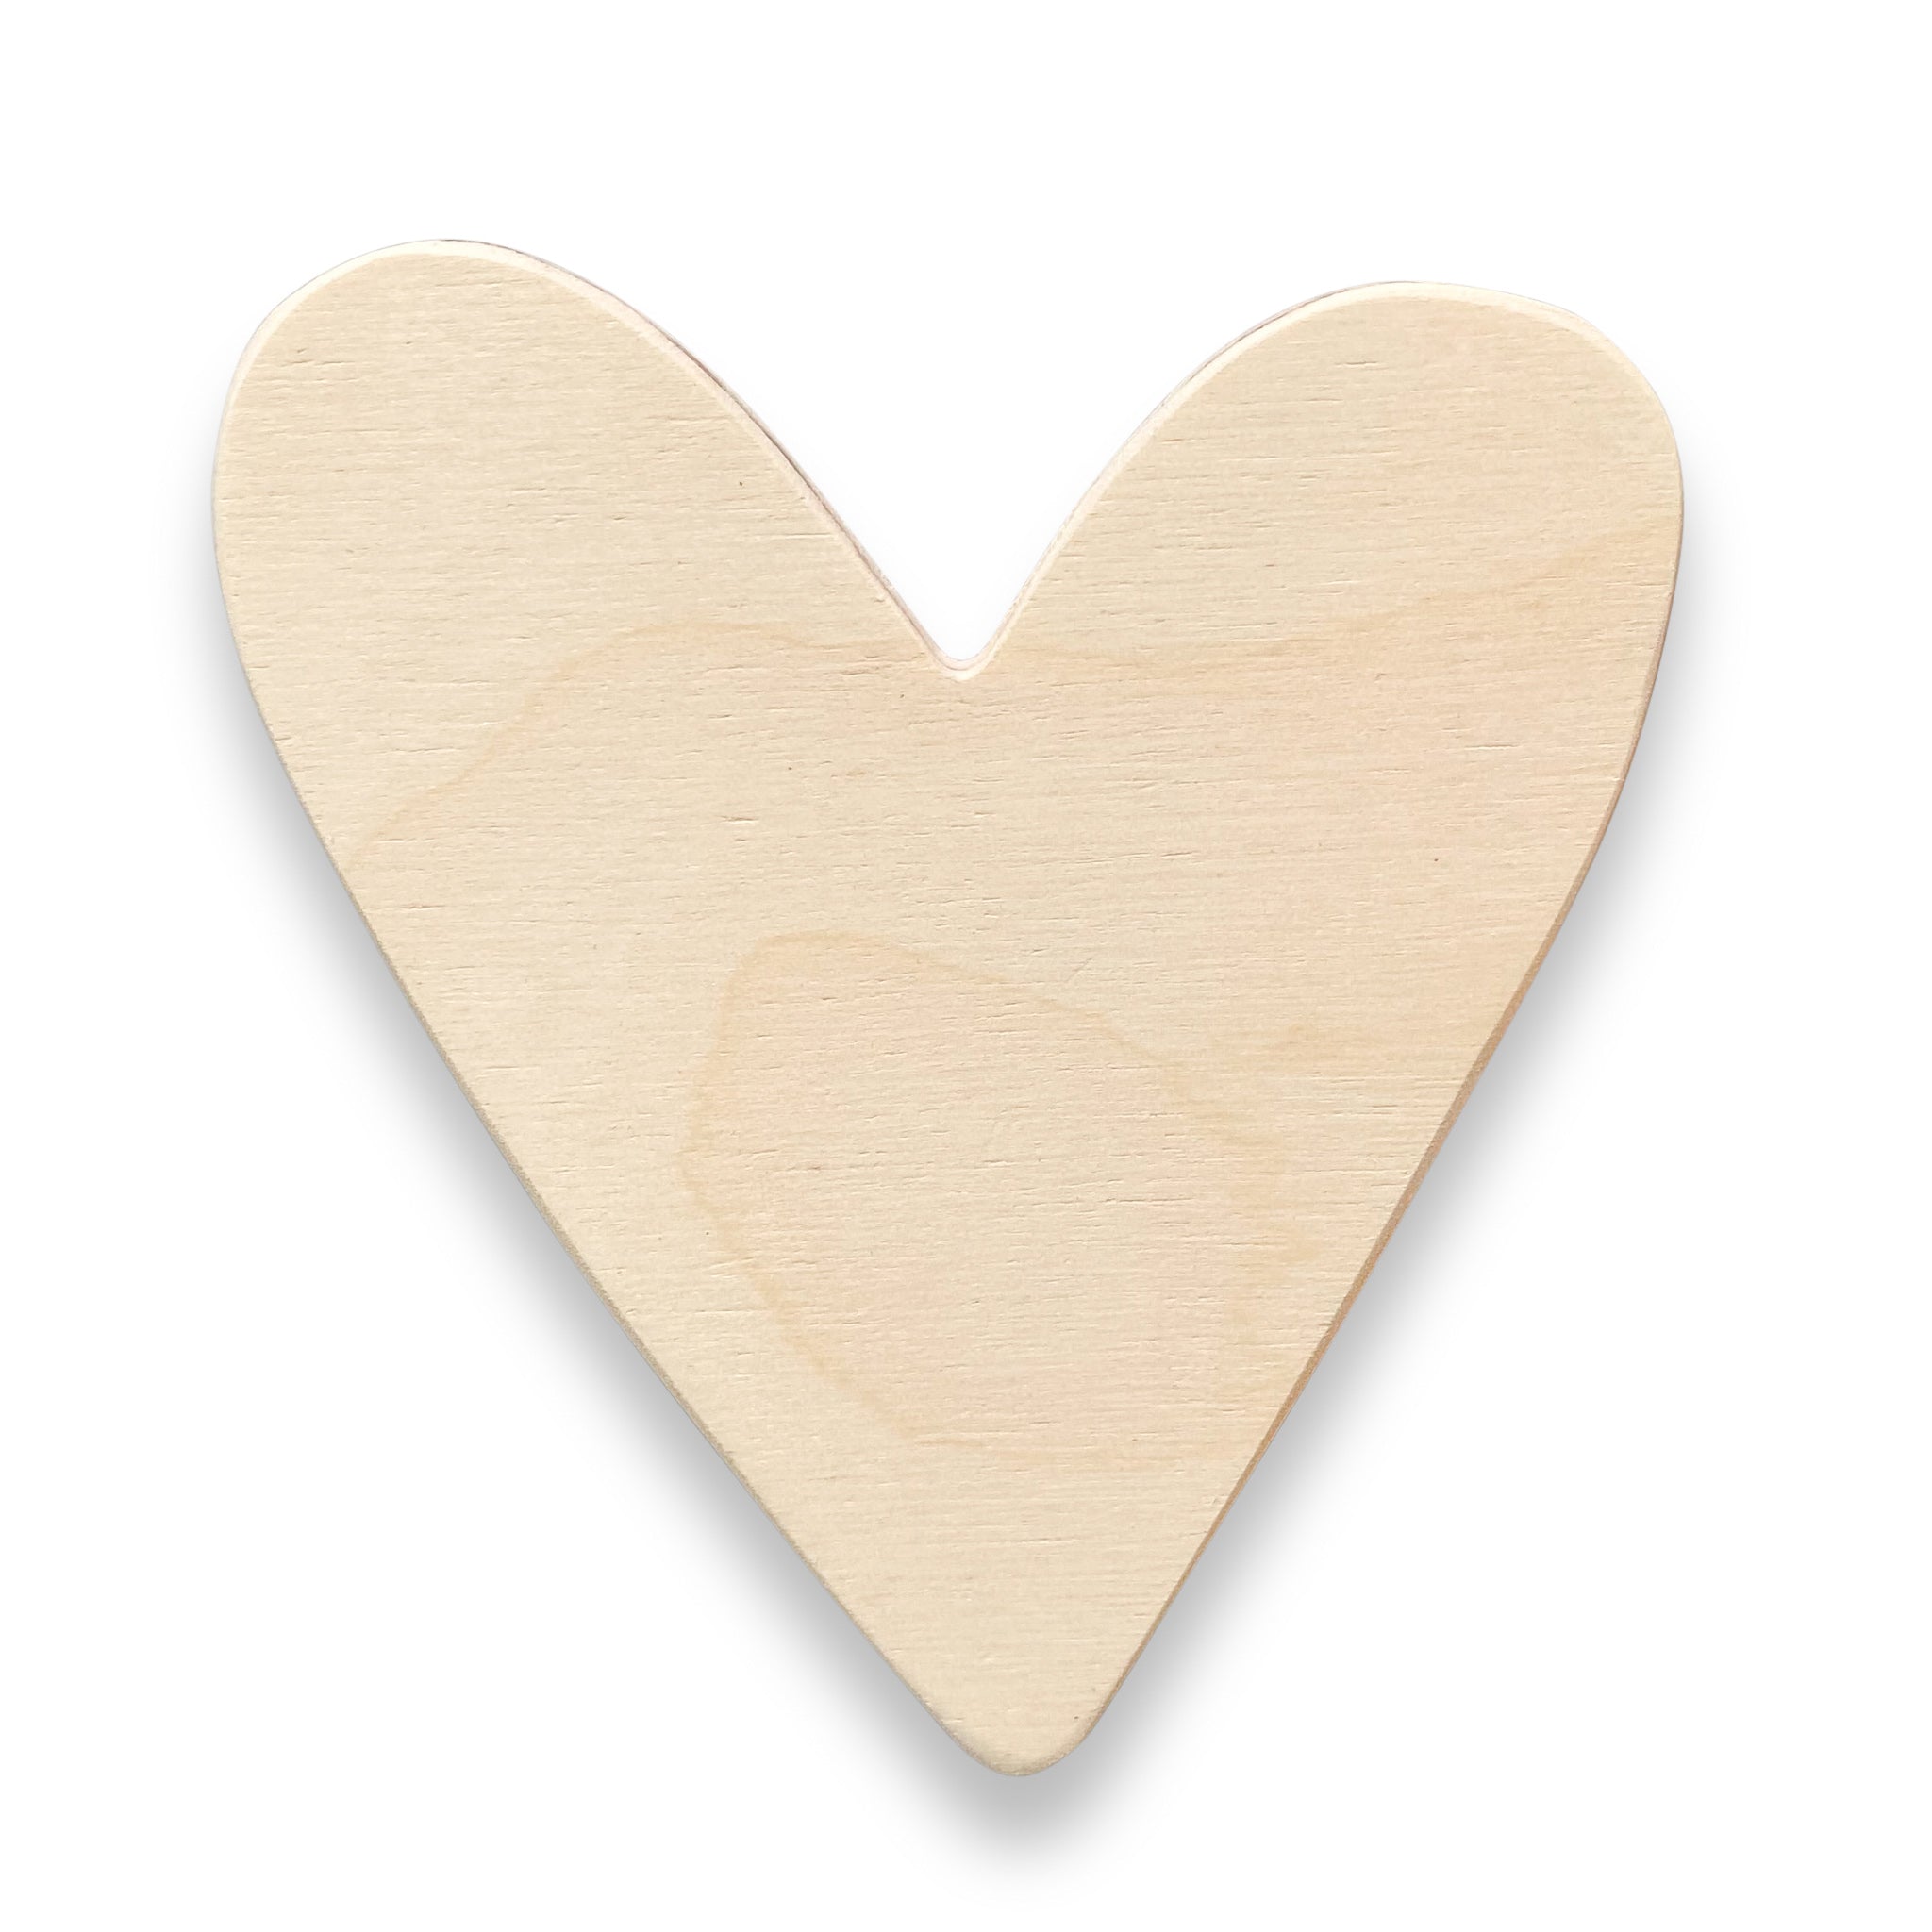 Wooden wall hooks children's room | Cloud and heart - natural